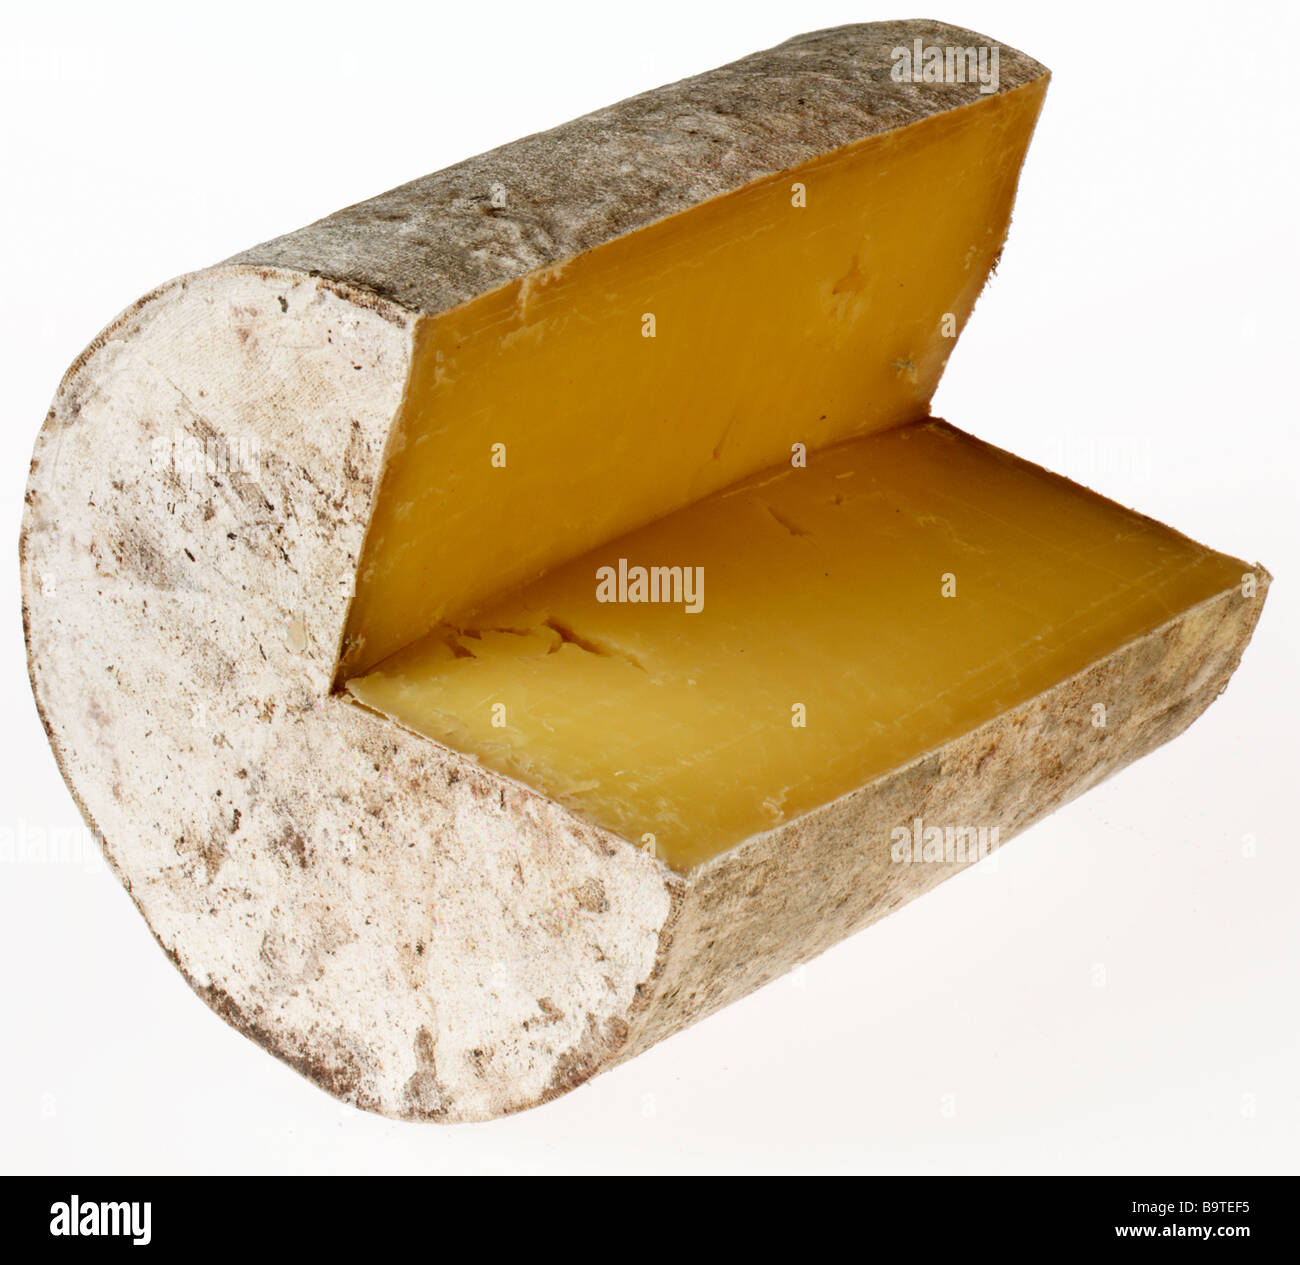 Cheddar cheese Stock Photo